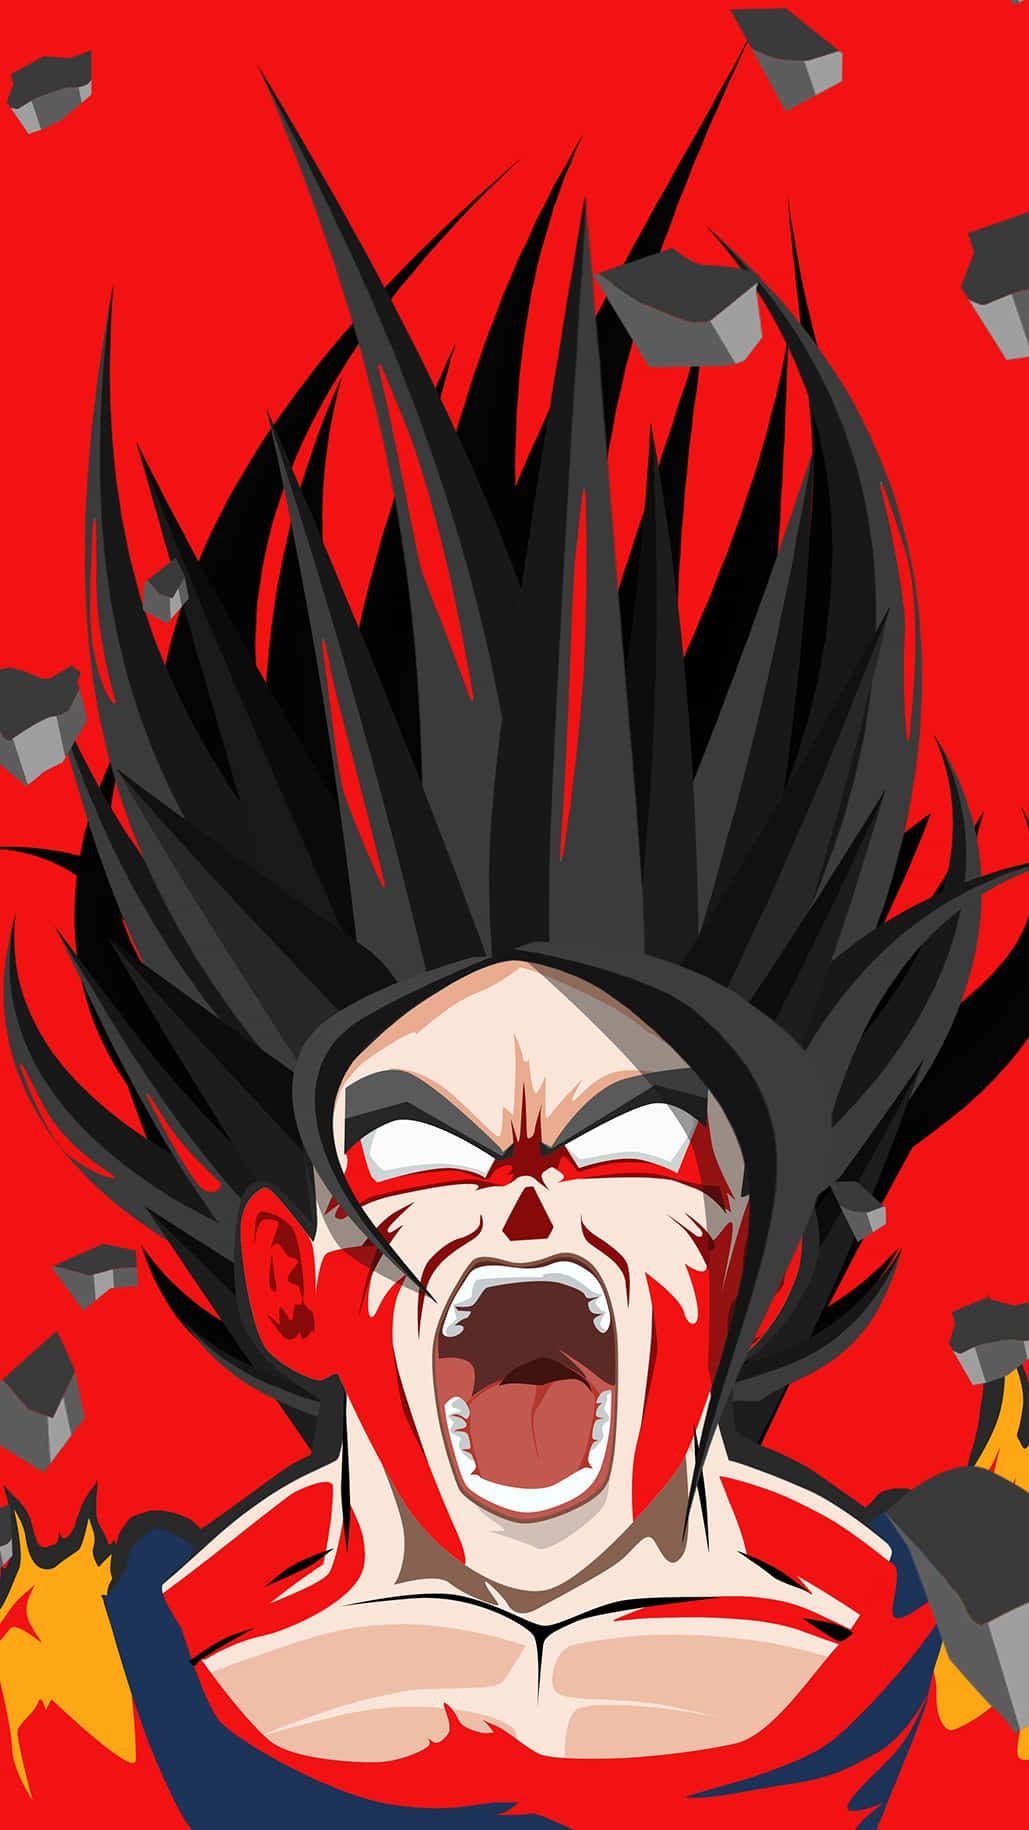 "Angry Goku unleashes his power with a Kamehameha wave." Wallpaper